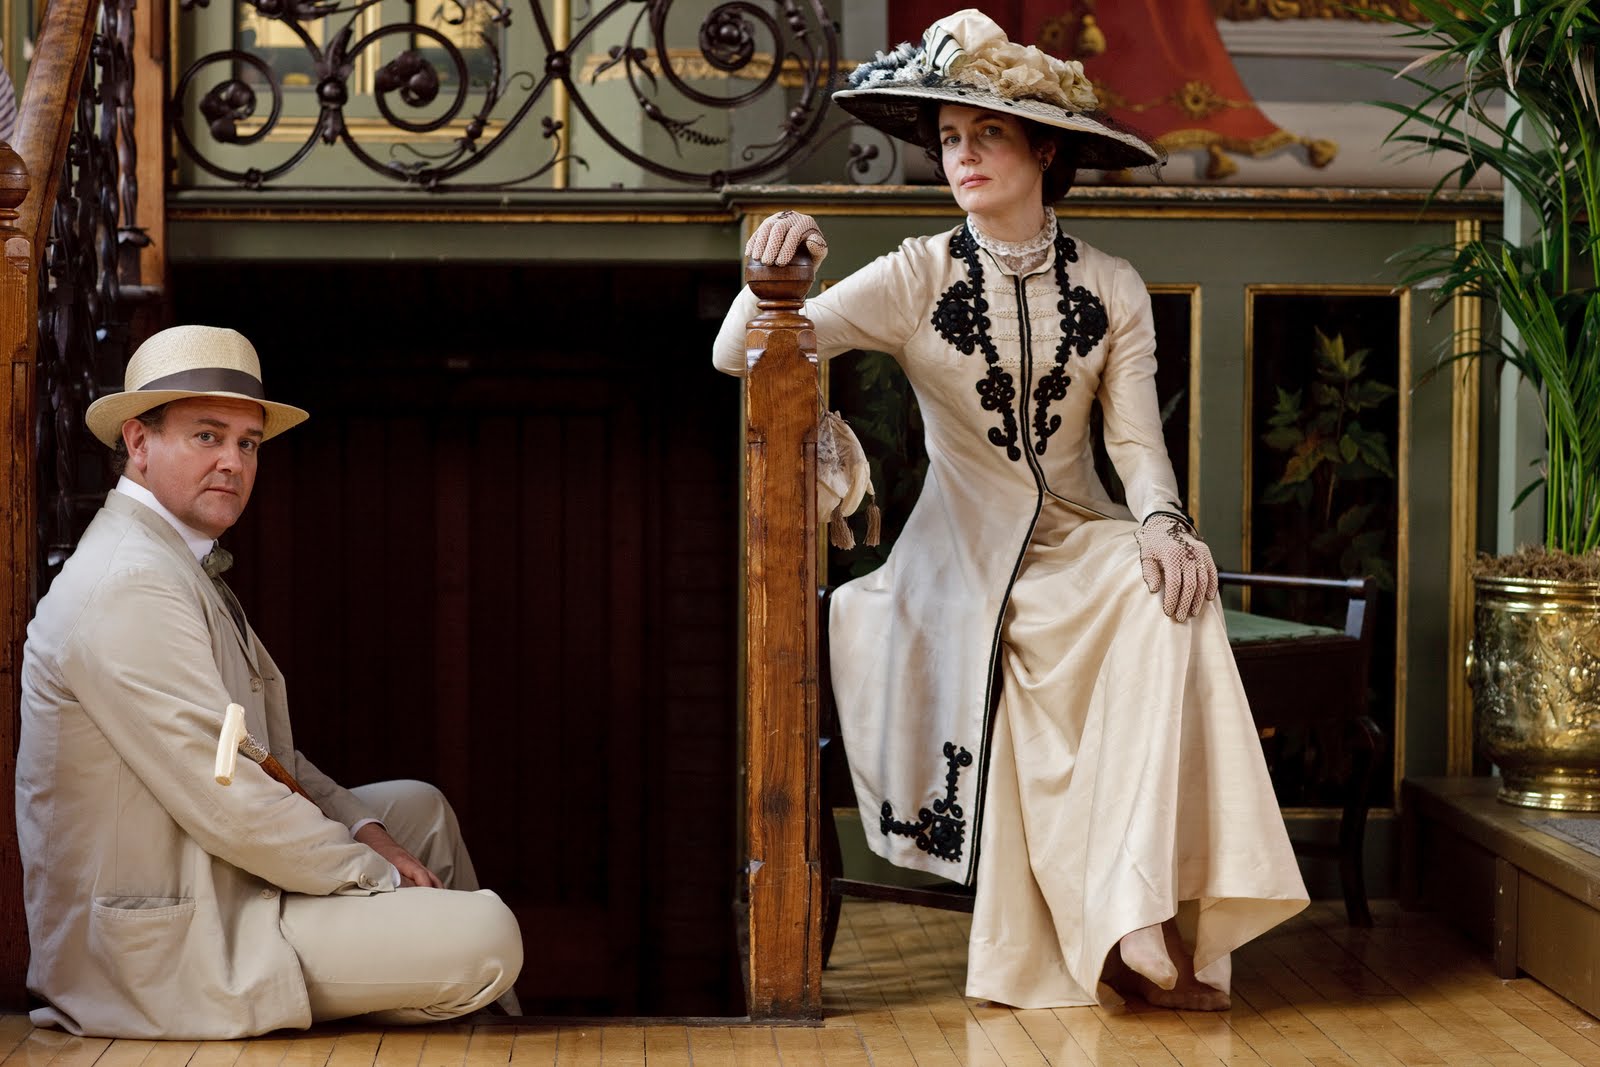 ... Serenity of Period Films: Downton Abbey on PBS - List of episodes